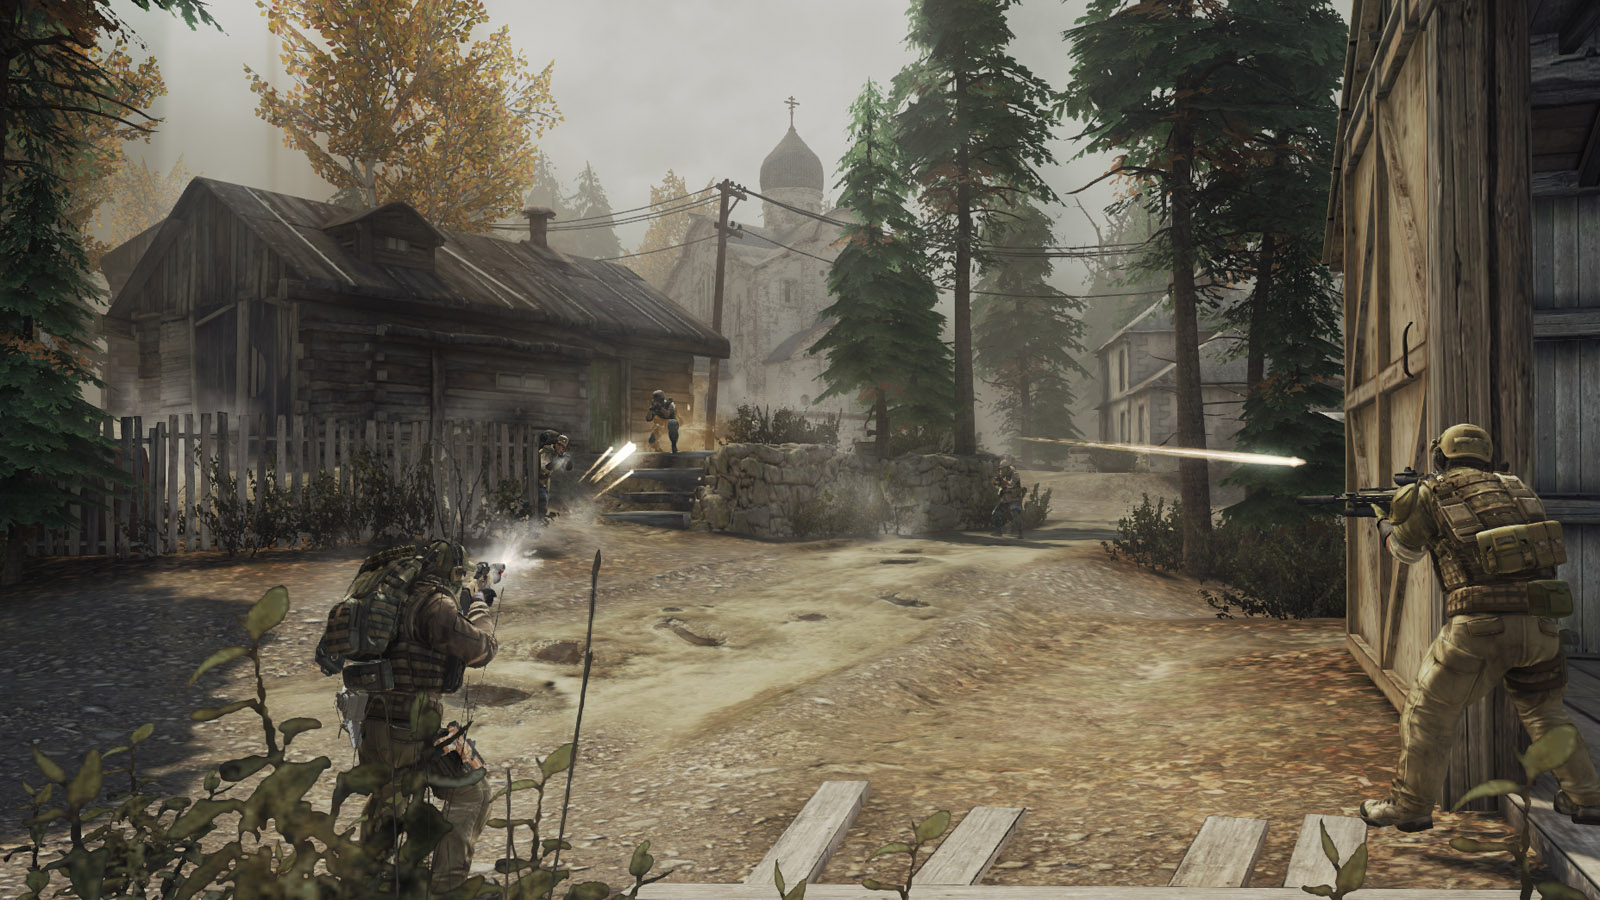 The multiplayer beta will give you access to two maps, Pipeline and